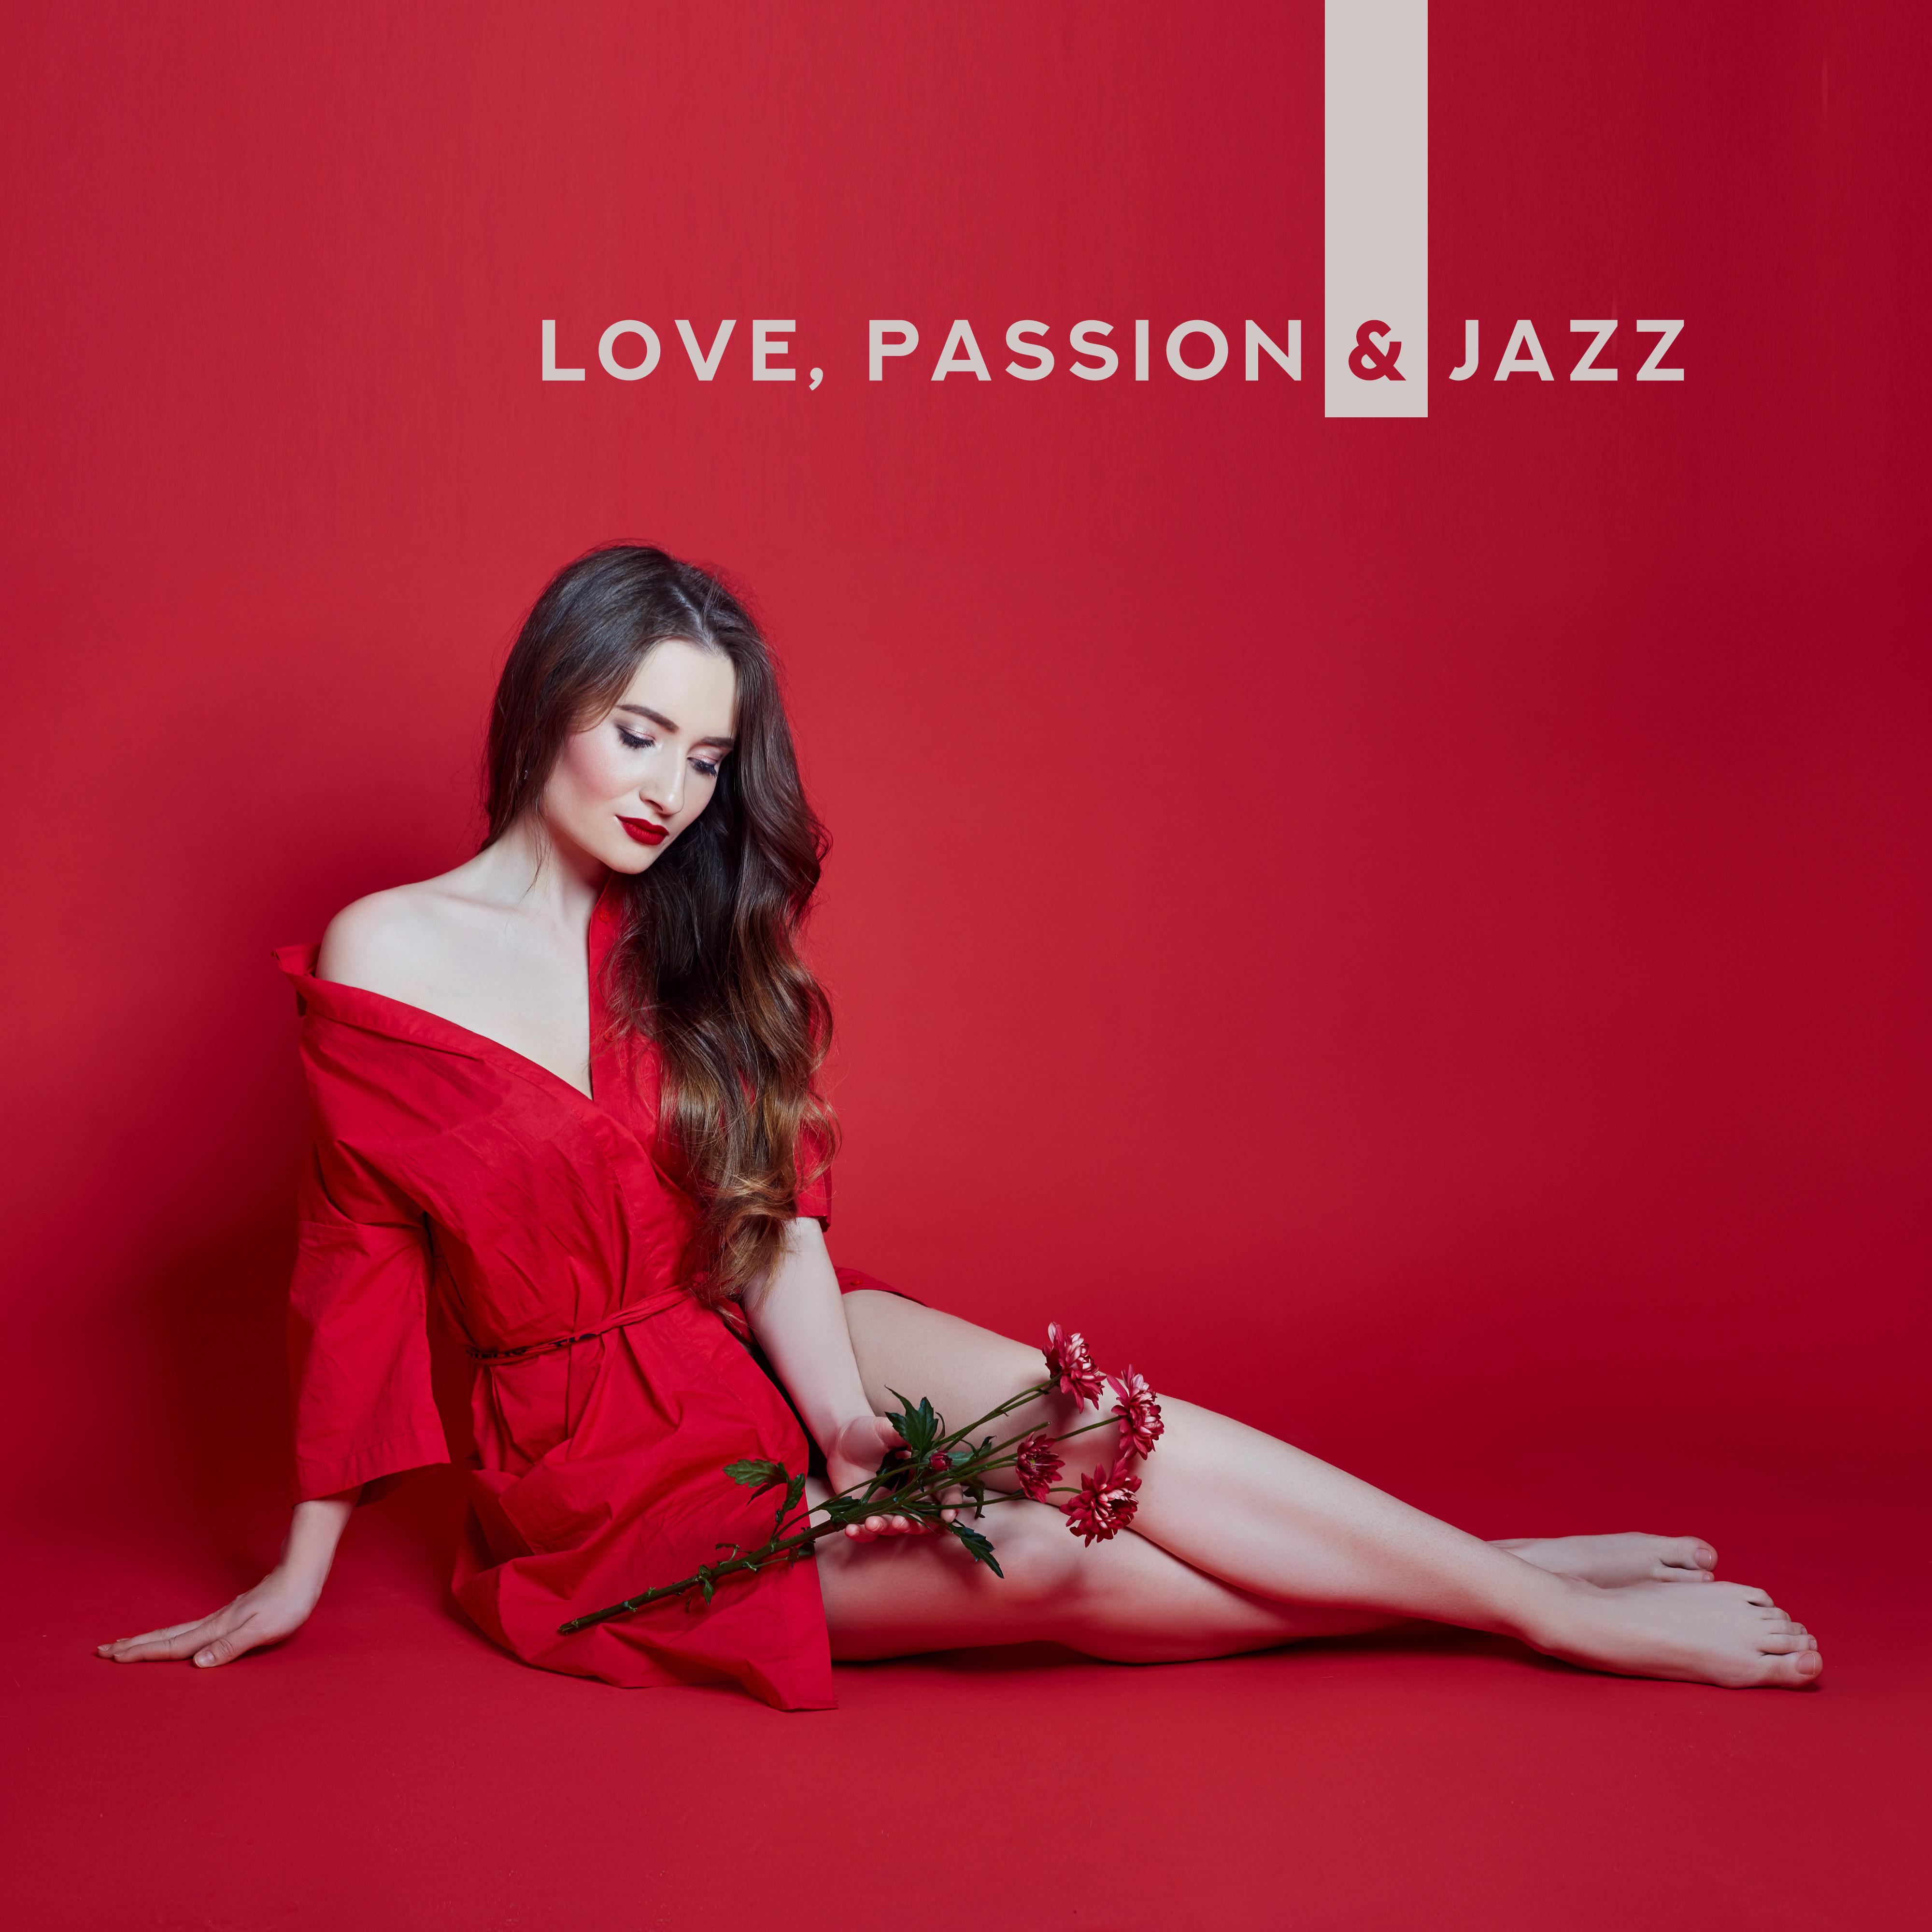 Love, Passion & Jazz: 2019 Romantic Smooth Jazz Instrumental Music for Couple’s, Songs for Dating & Eating Tasty Dinner in the Restaurant, Anniversary, Celebrating Happy Moments Together